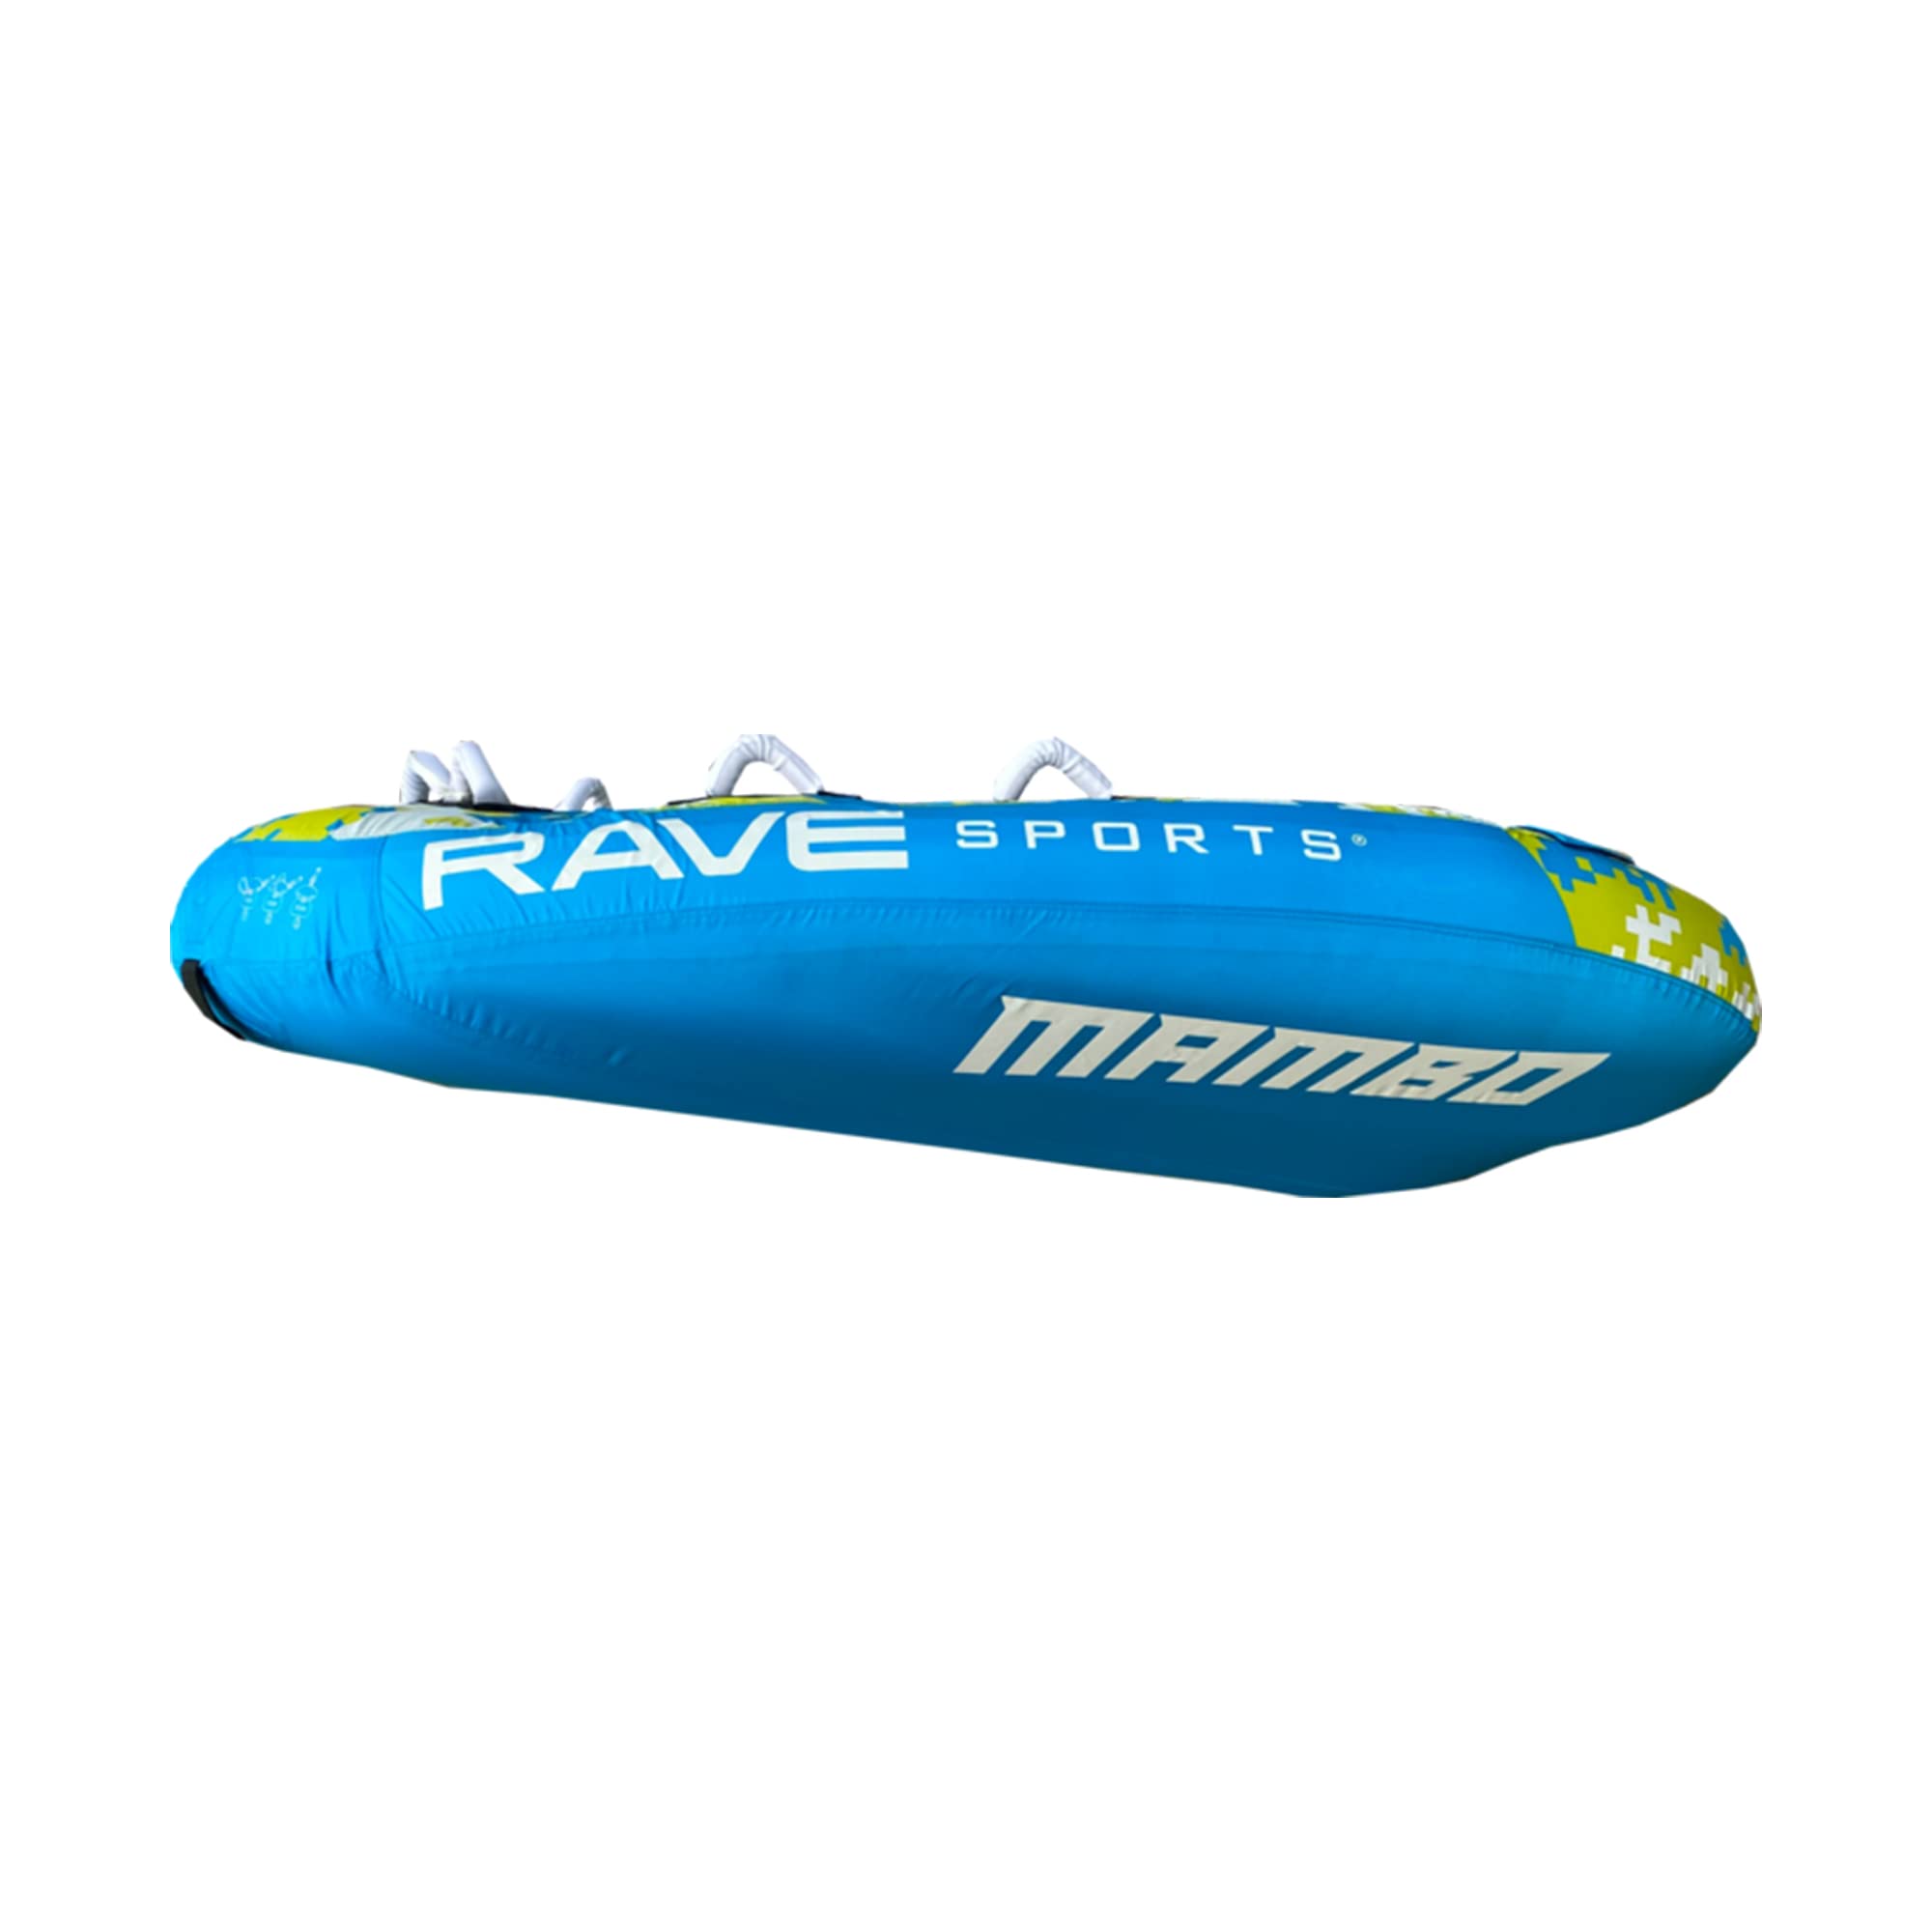 RAVE Sports Mambo Boat Towable Tube - Inflatable Boating Tube for 1-3 Riders